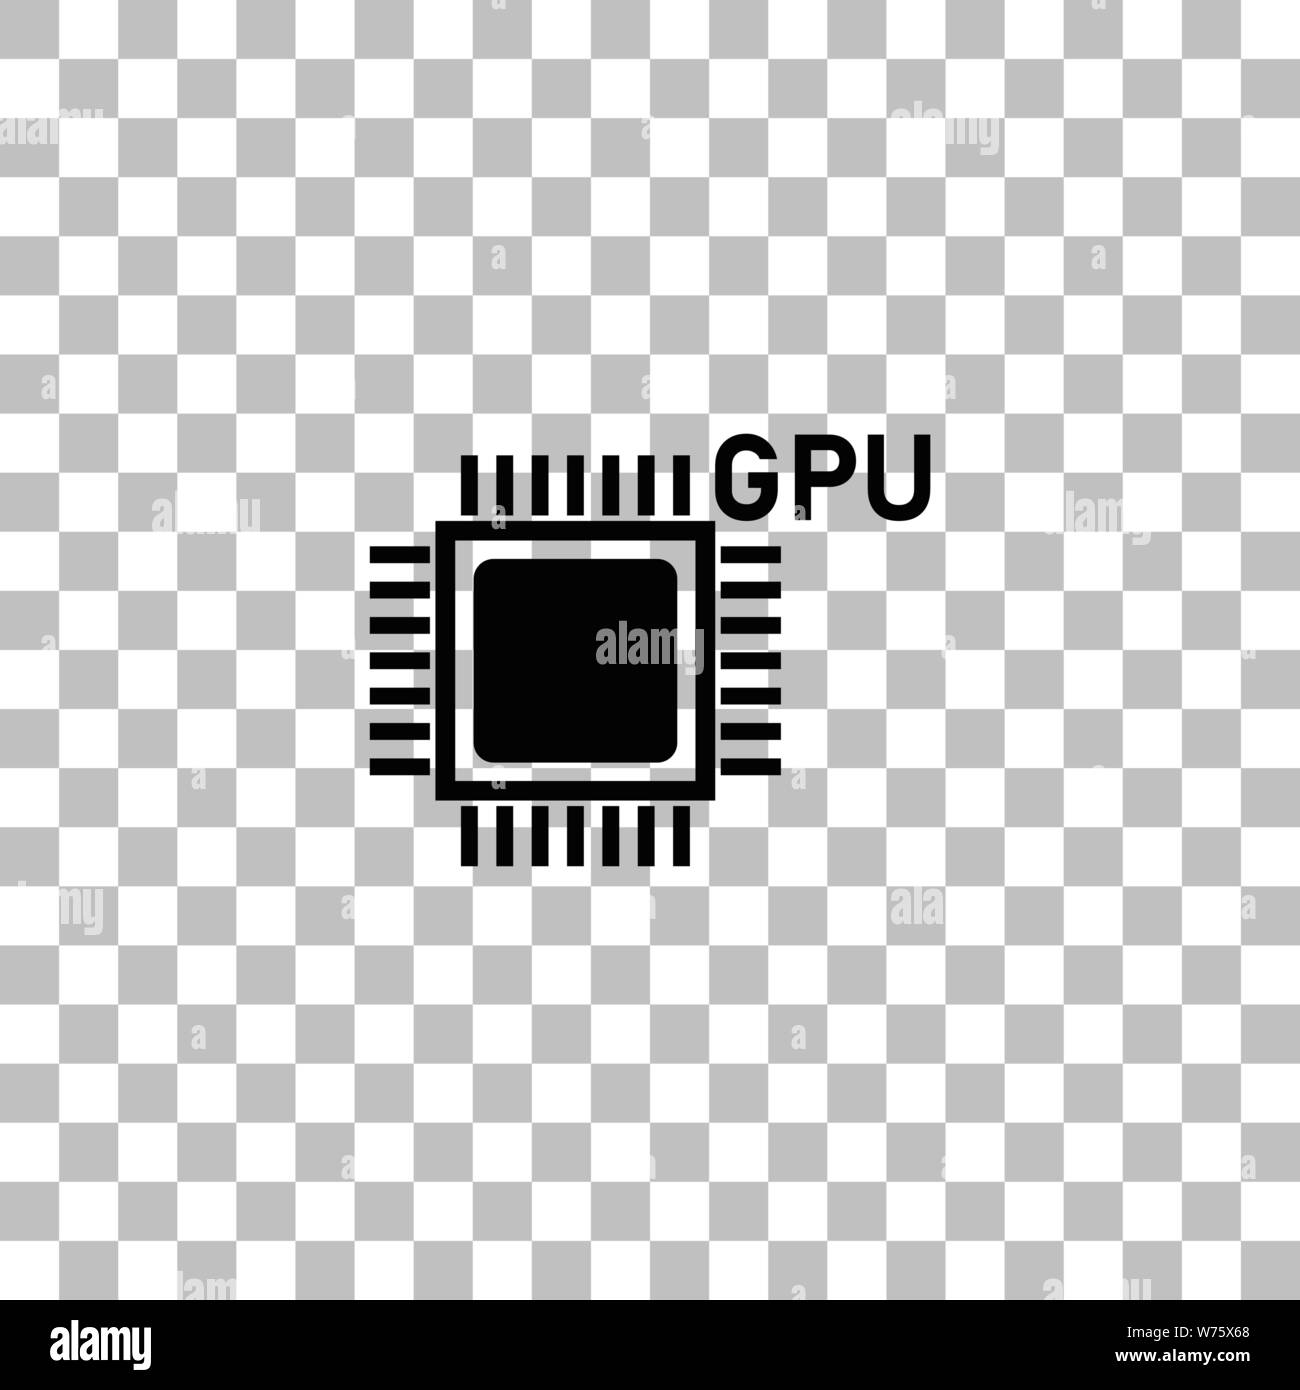 Gpu. Black flat icon on a transparent background. Pictogram for your project Stock Vector